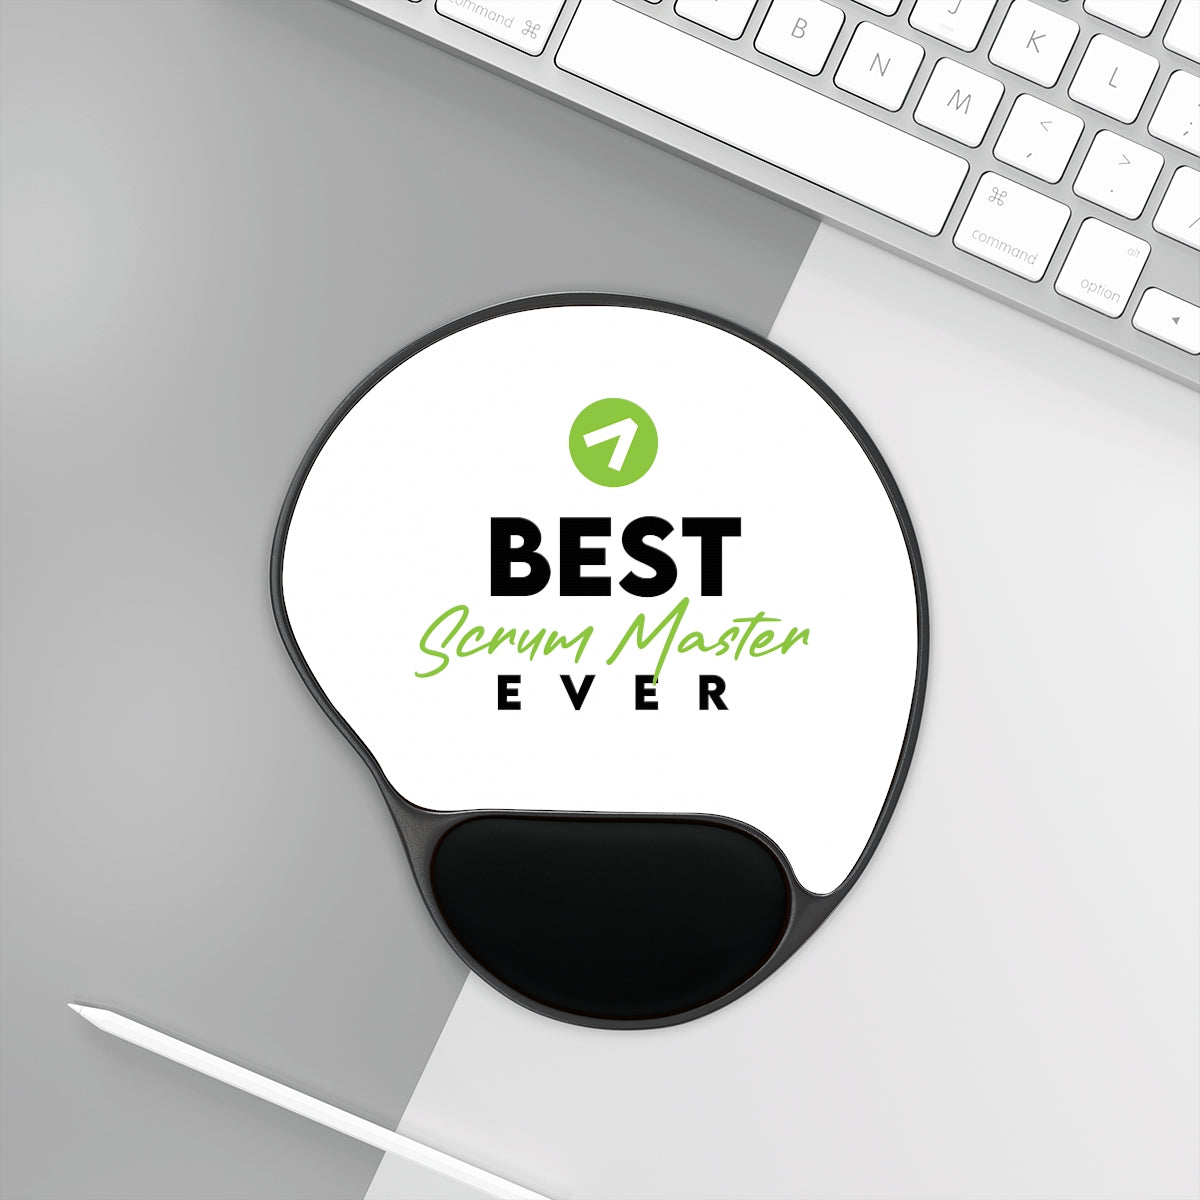 Best Scrum Master - Green - Mouse Pad With Wrist Rest